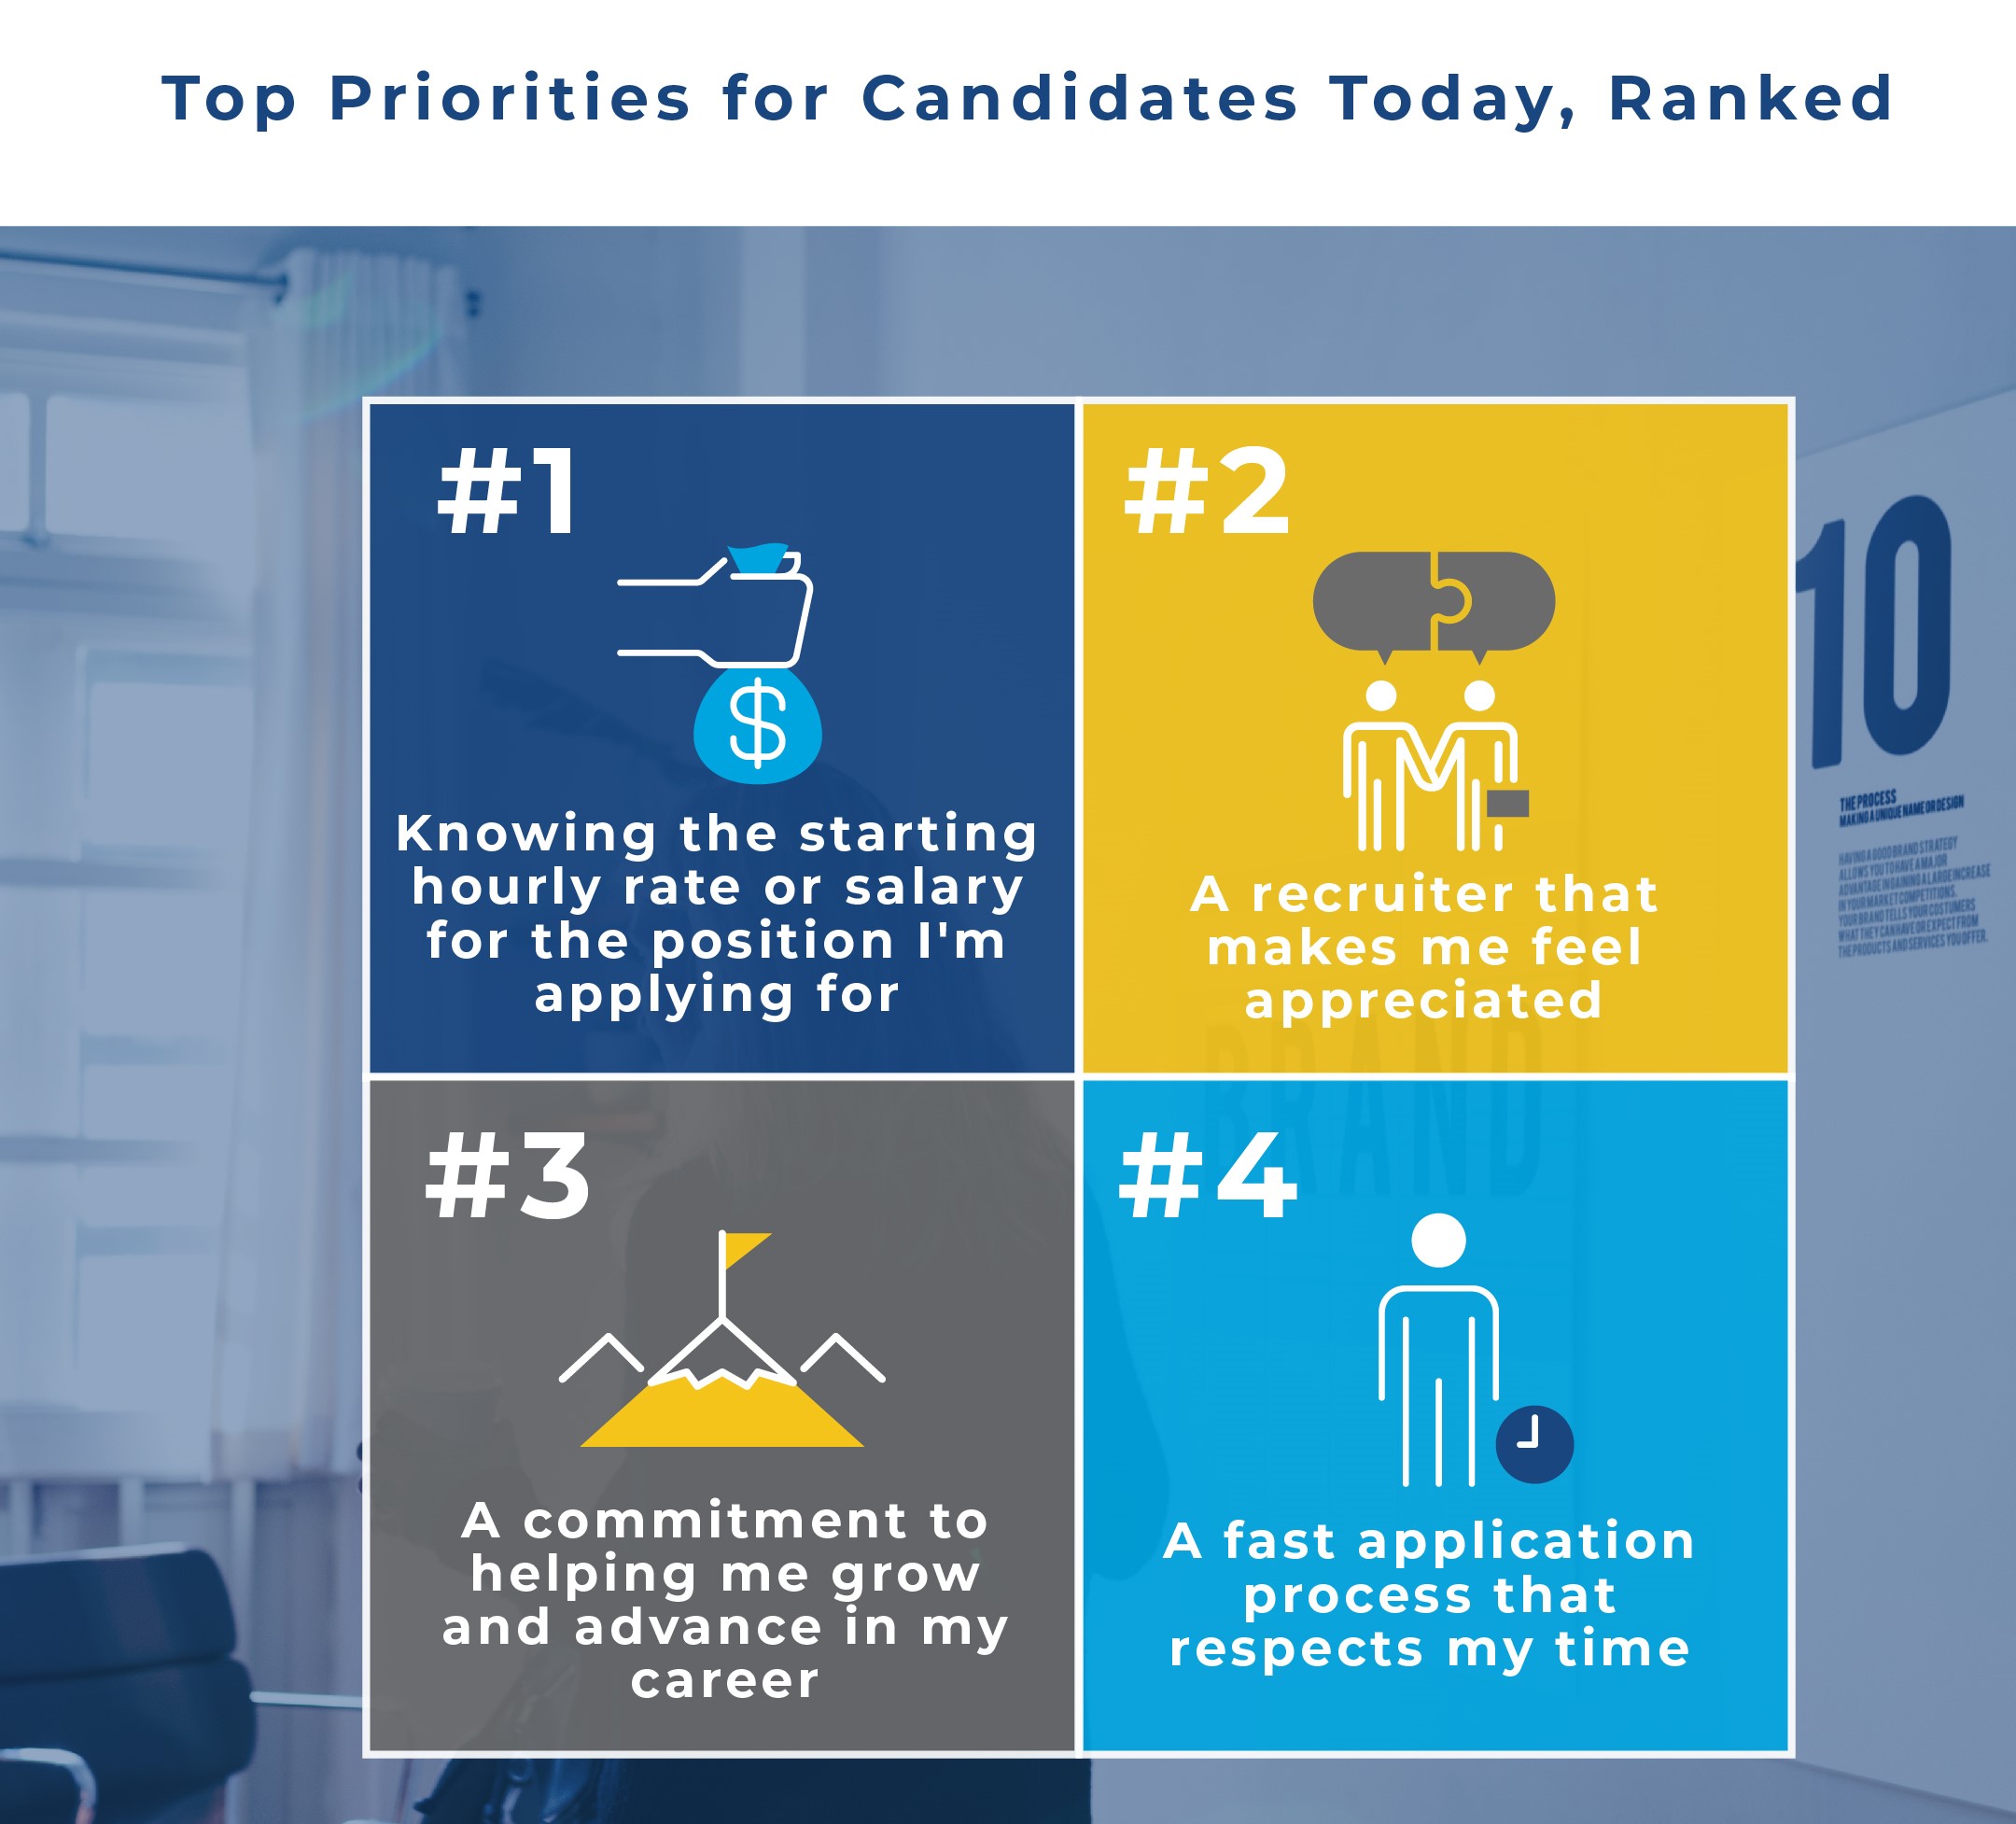 Hiring Assessments: Do Employers and Candidates See Eye to Eye?  [Infographic] - Lighthouse Research & Advisory